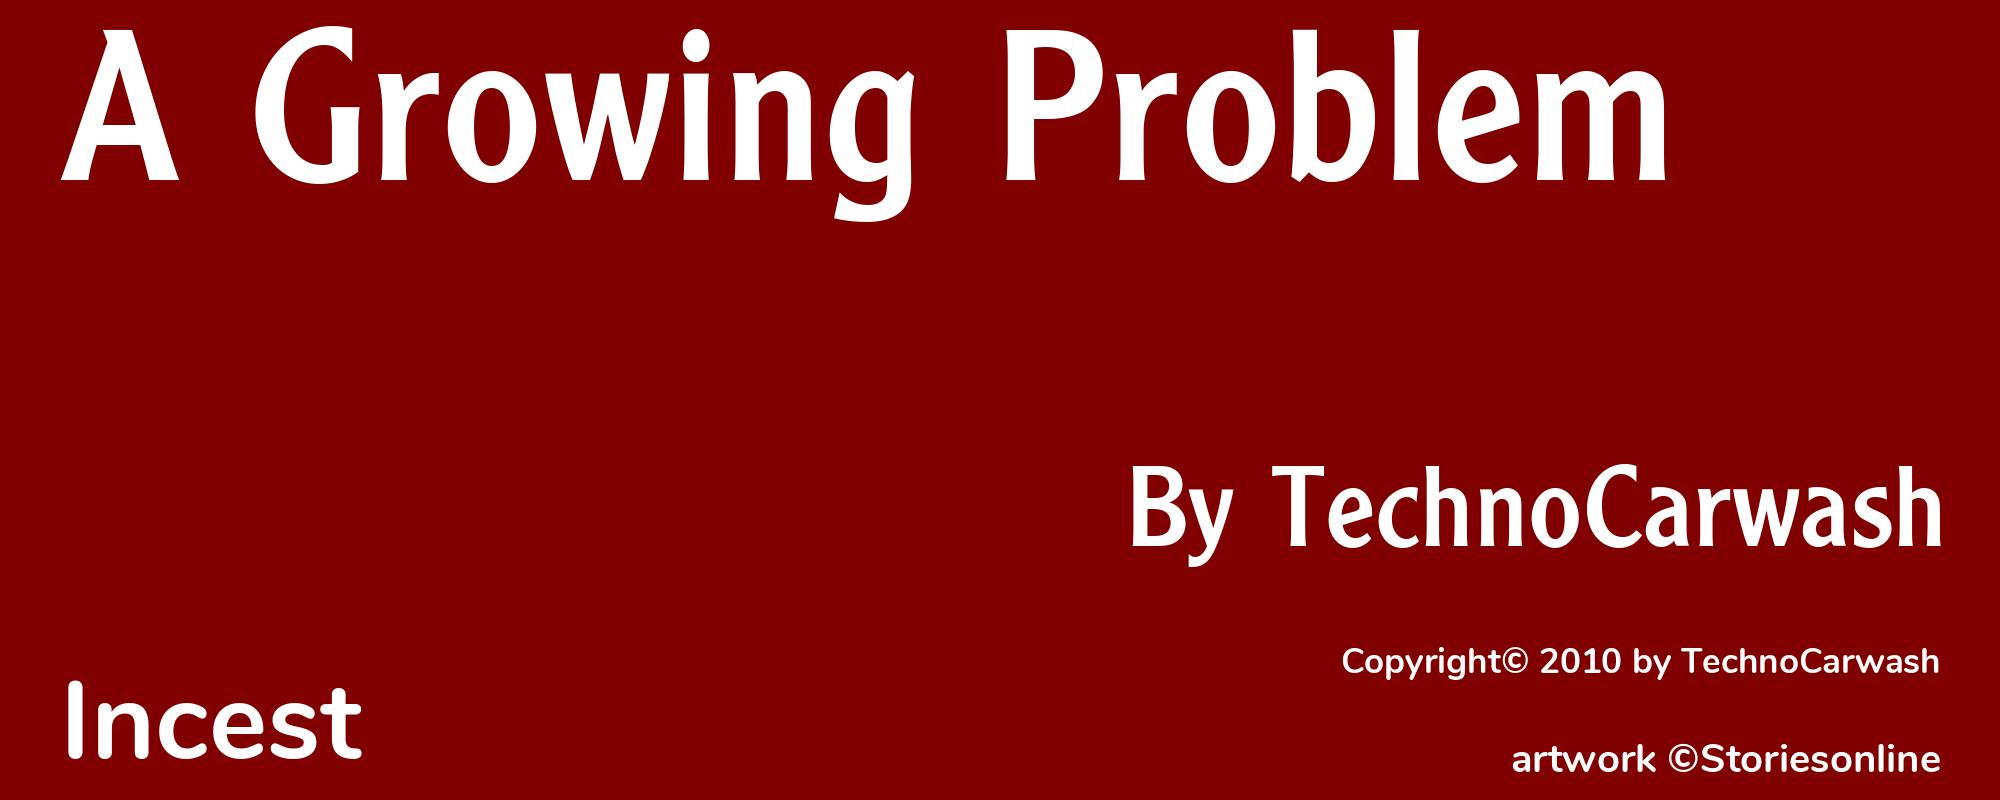 A Growing Problem - Cover